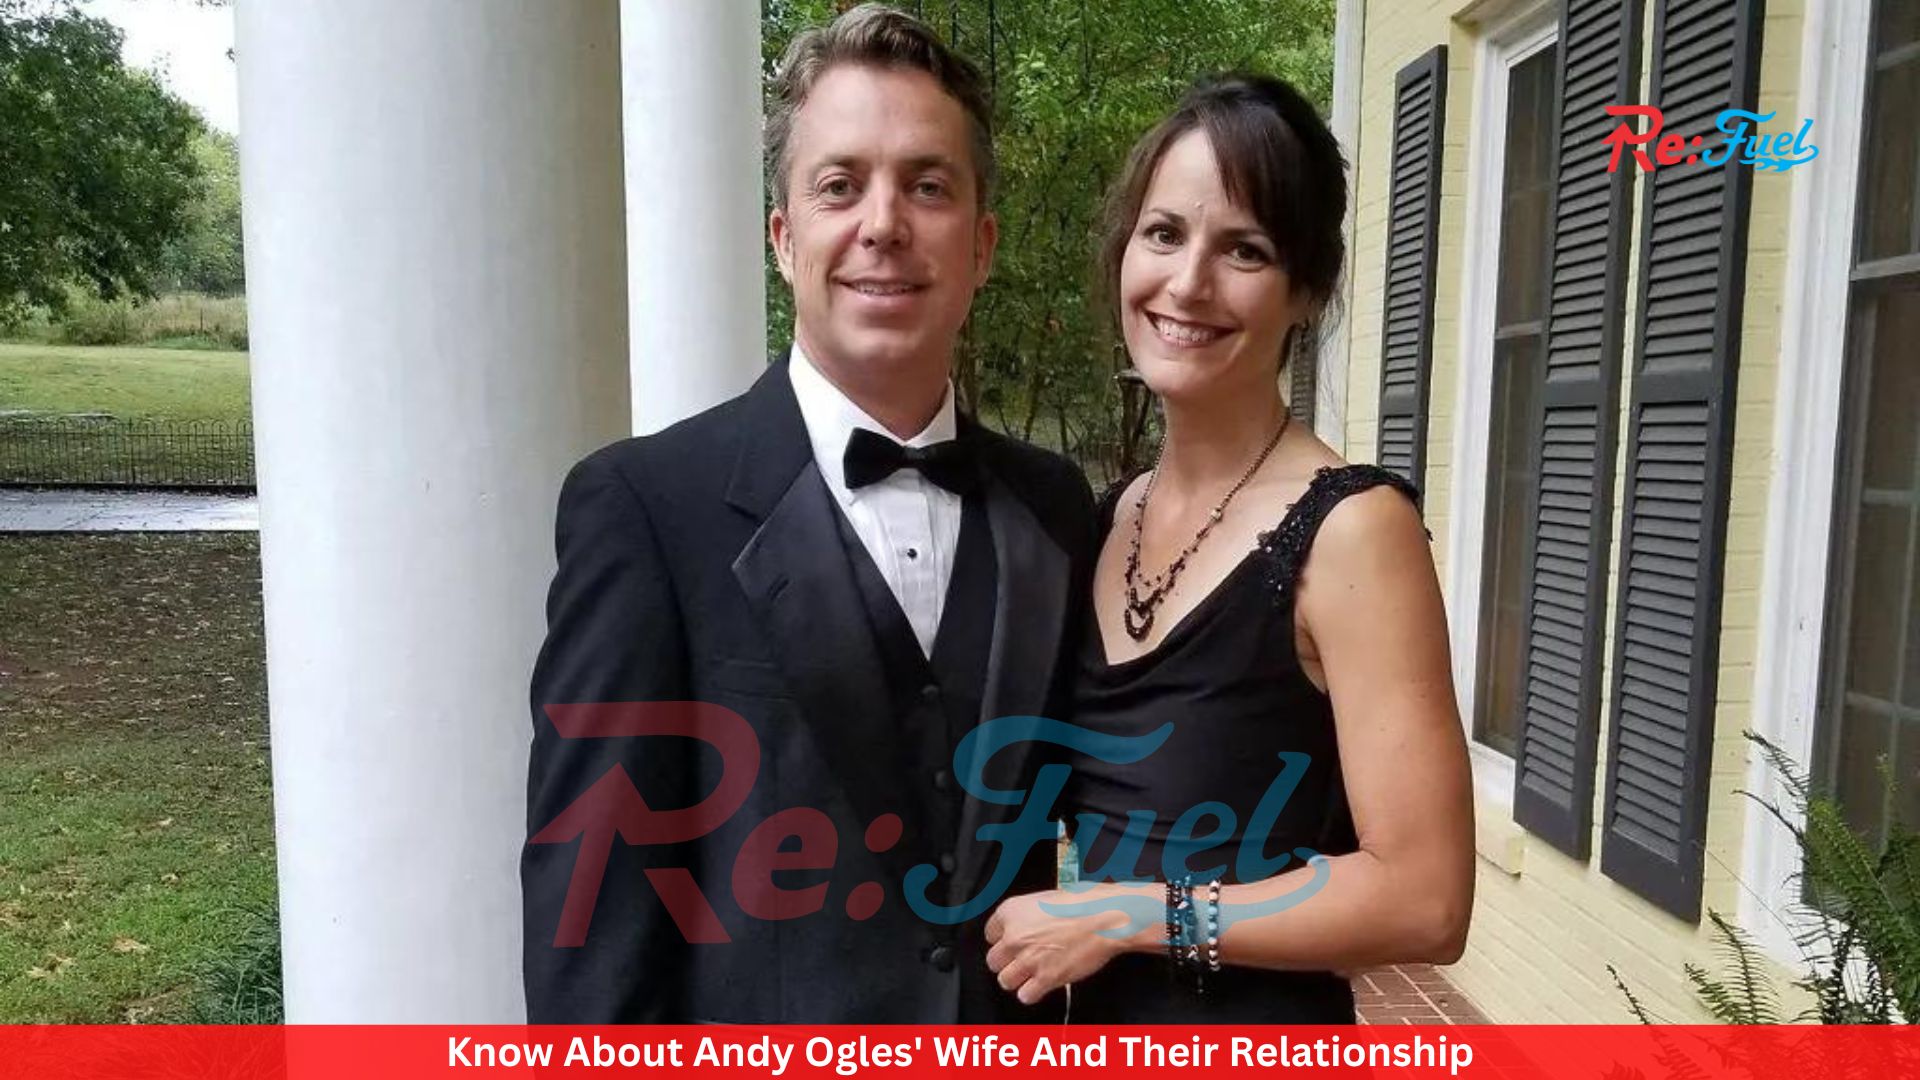 Know About Andy Ogles' Wife And Their Relationship